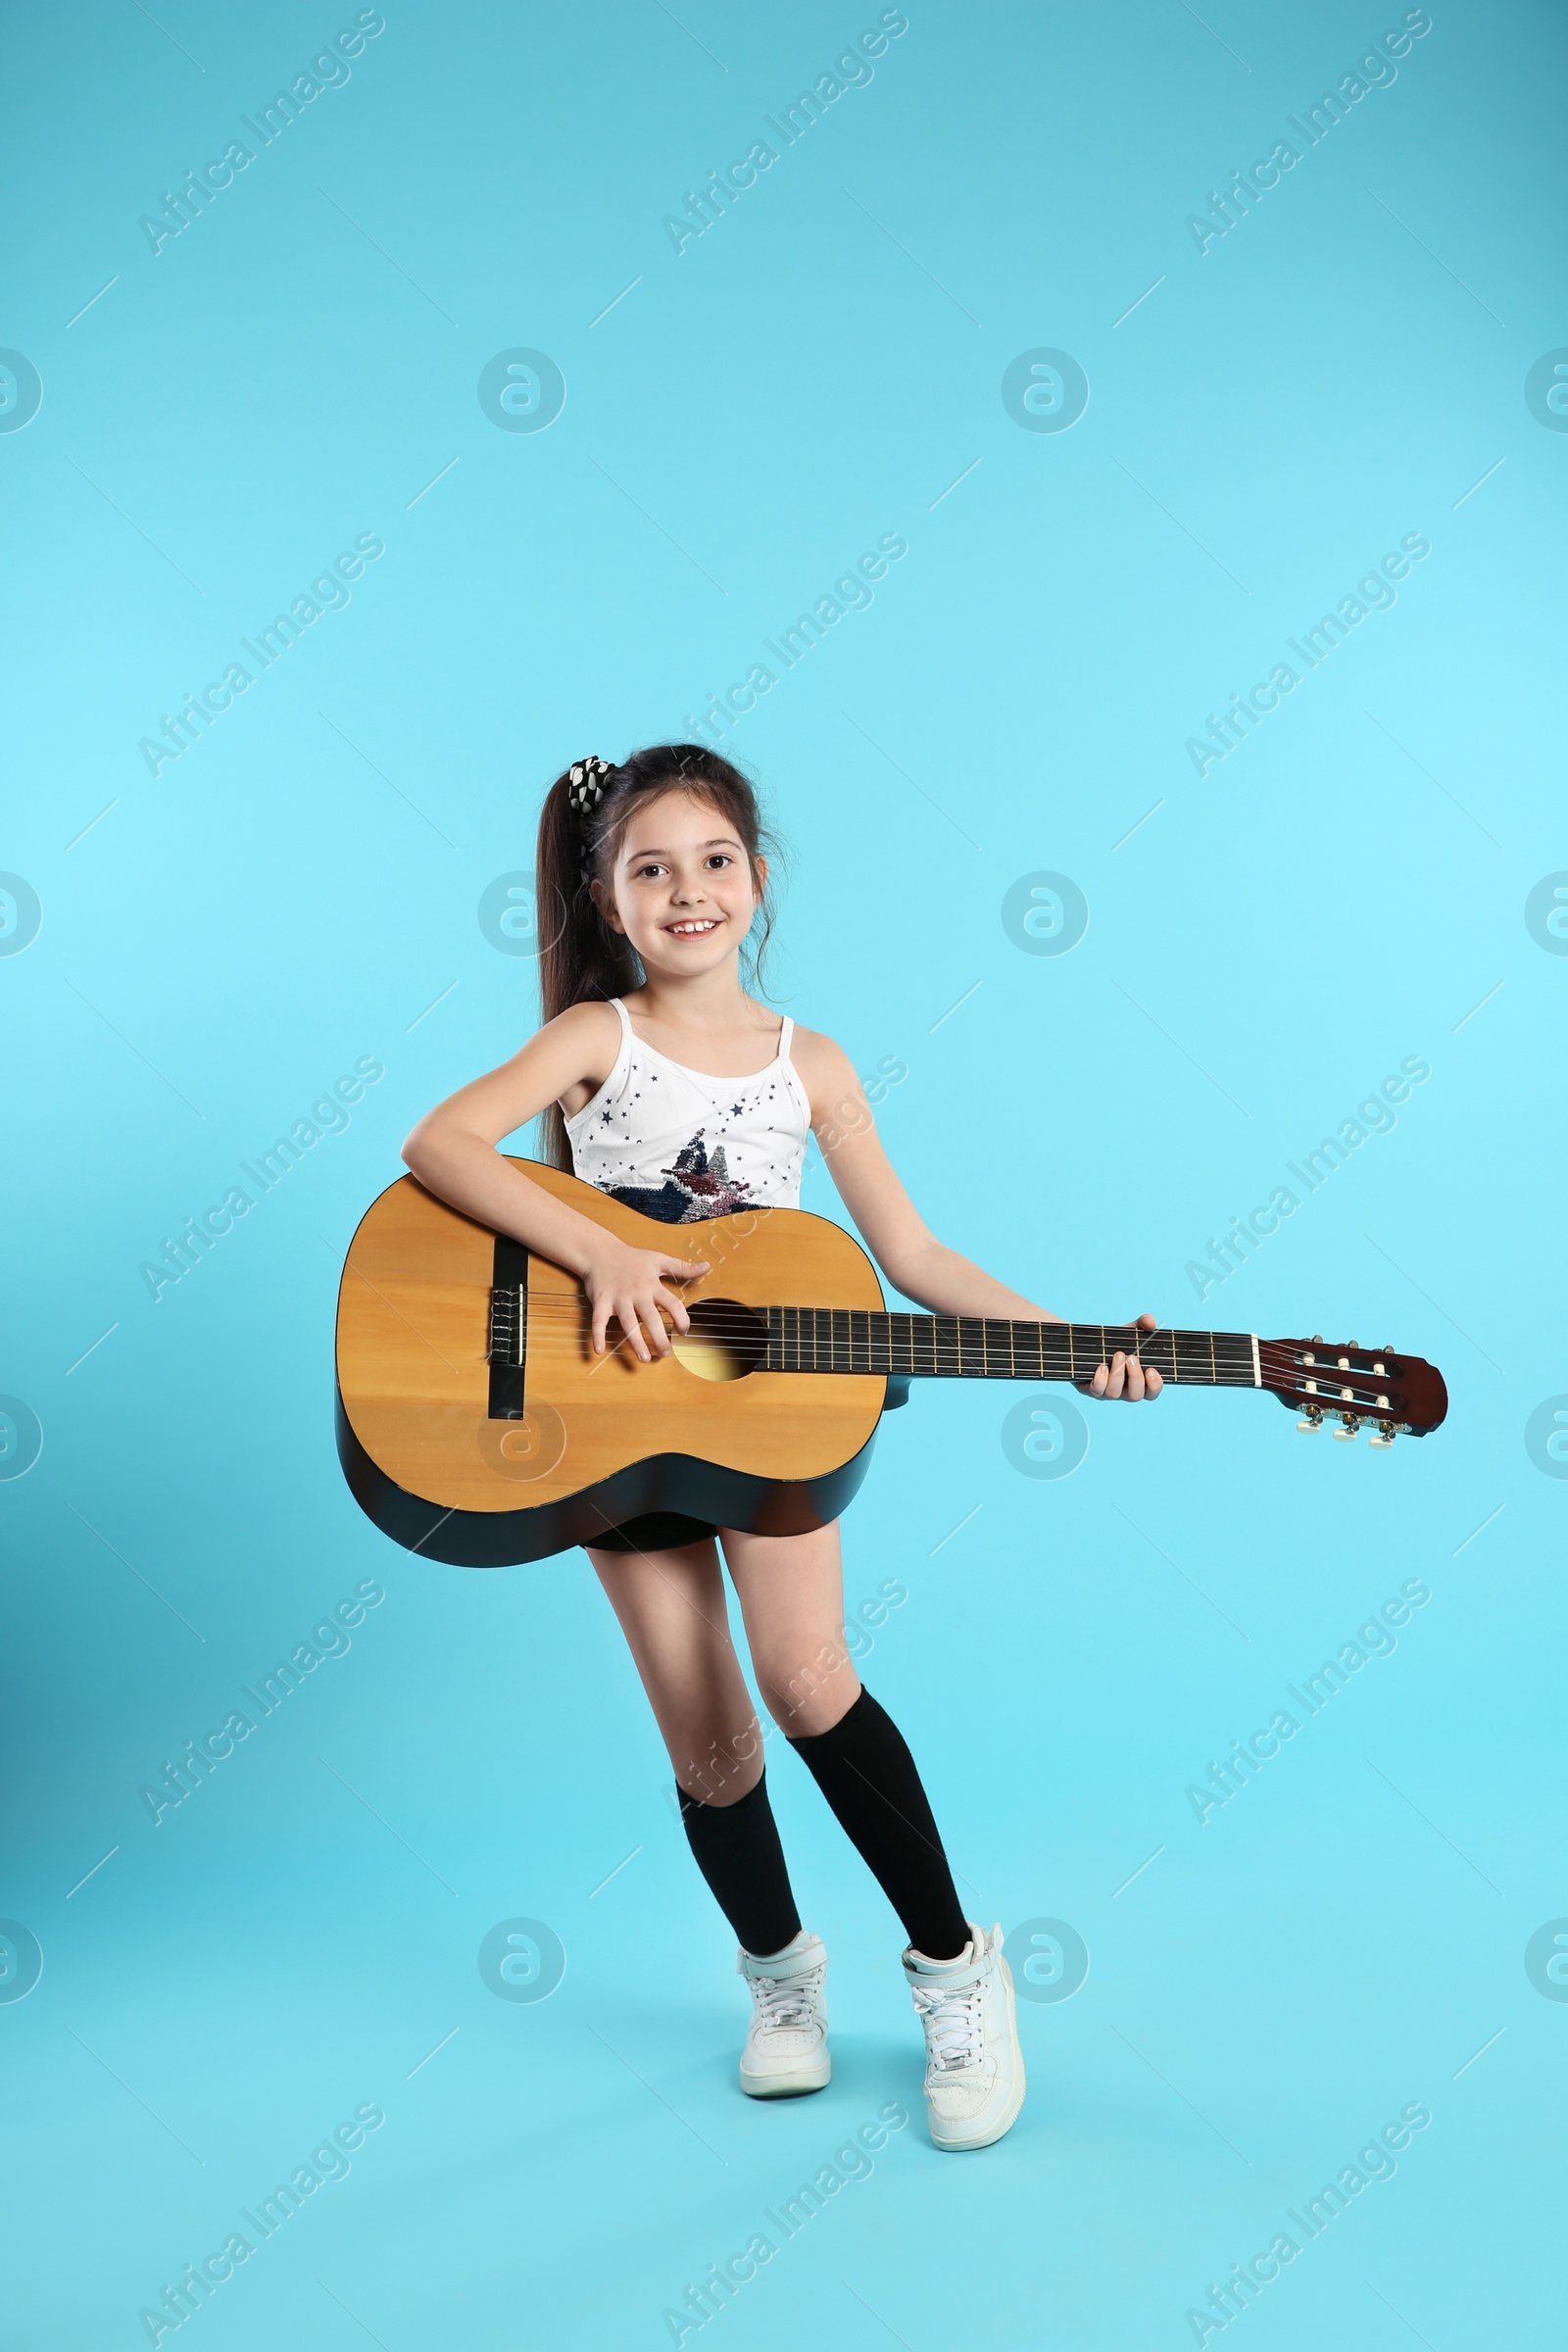 Photo of Cute little girl playing guitar on color background